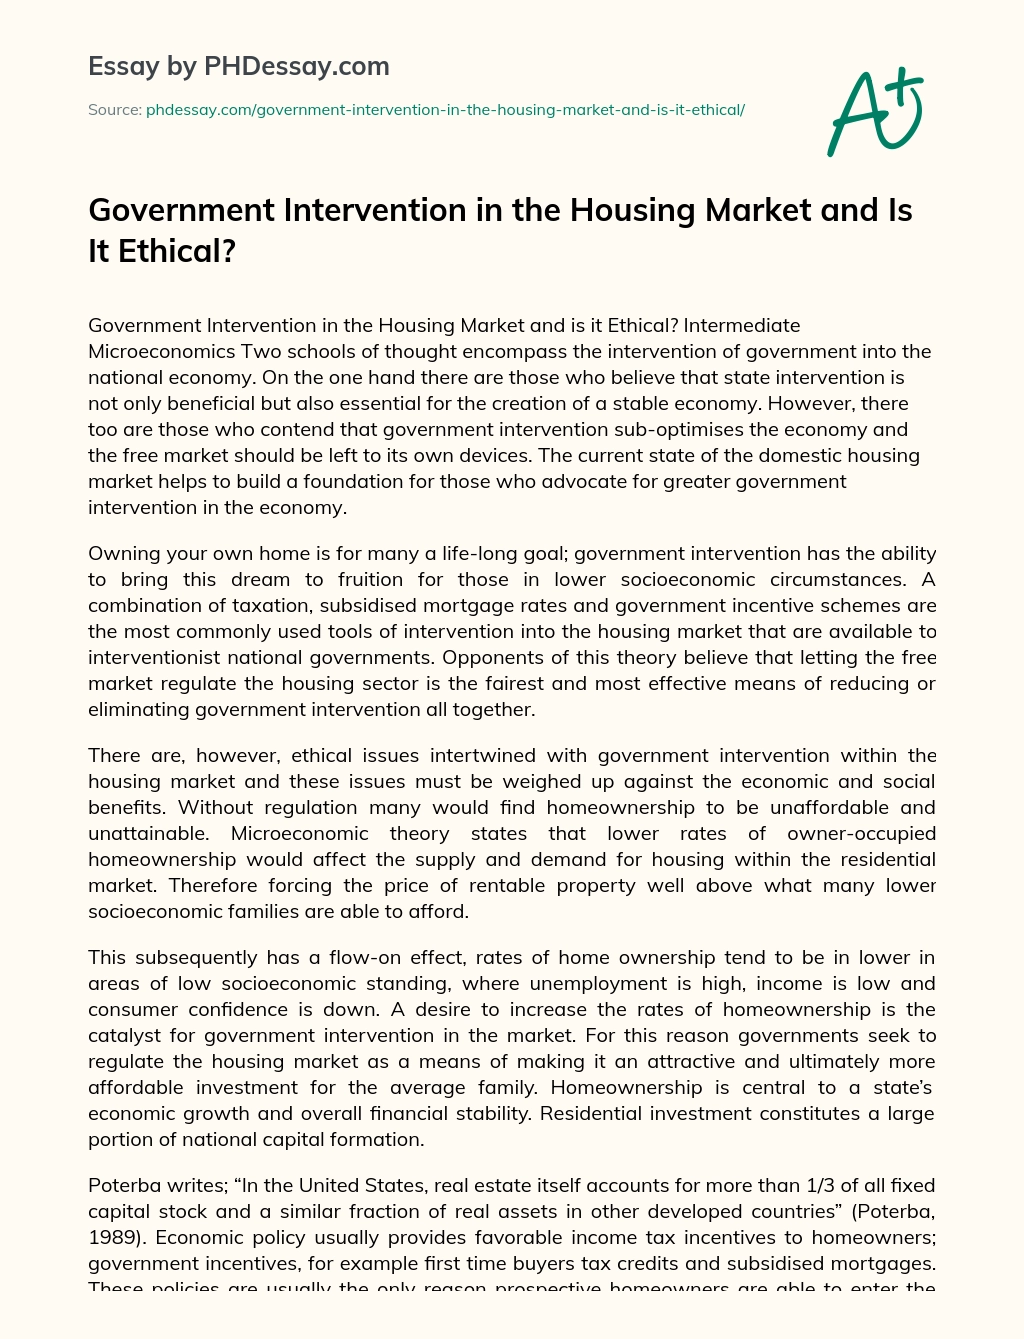 Government Intervention in the Housing Market and Is It Ethical? essay